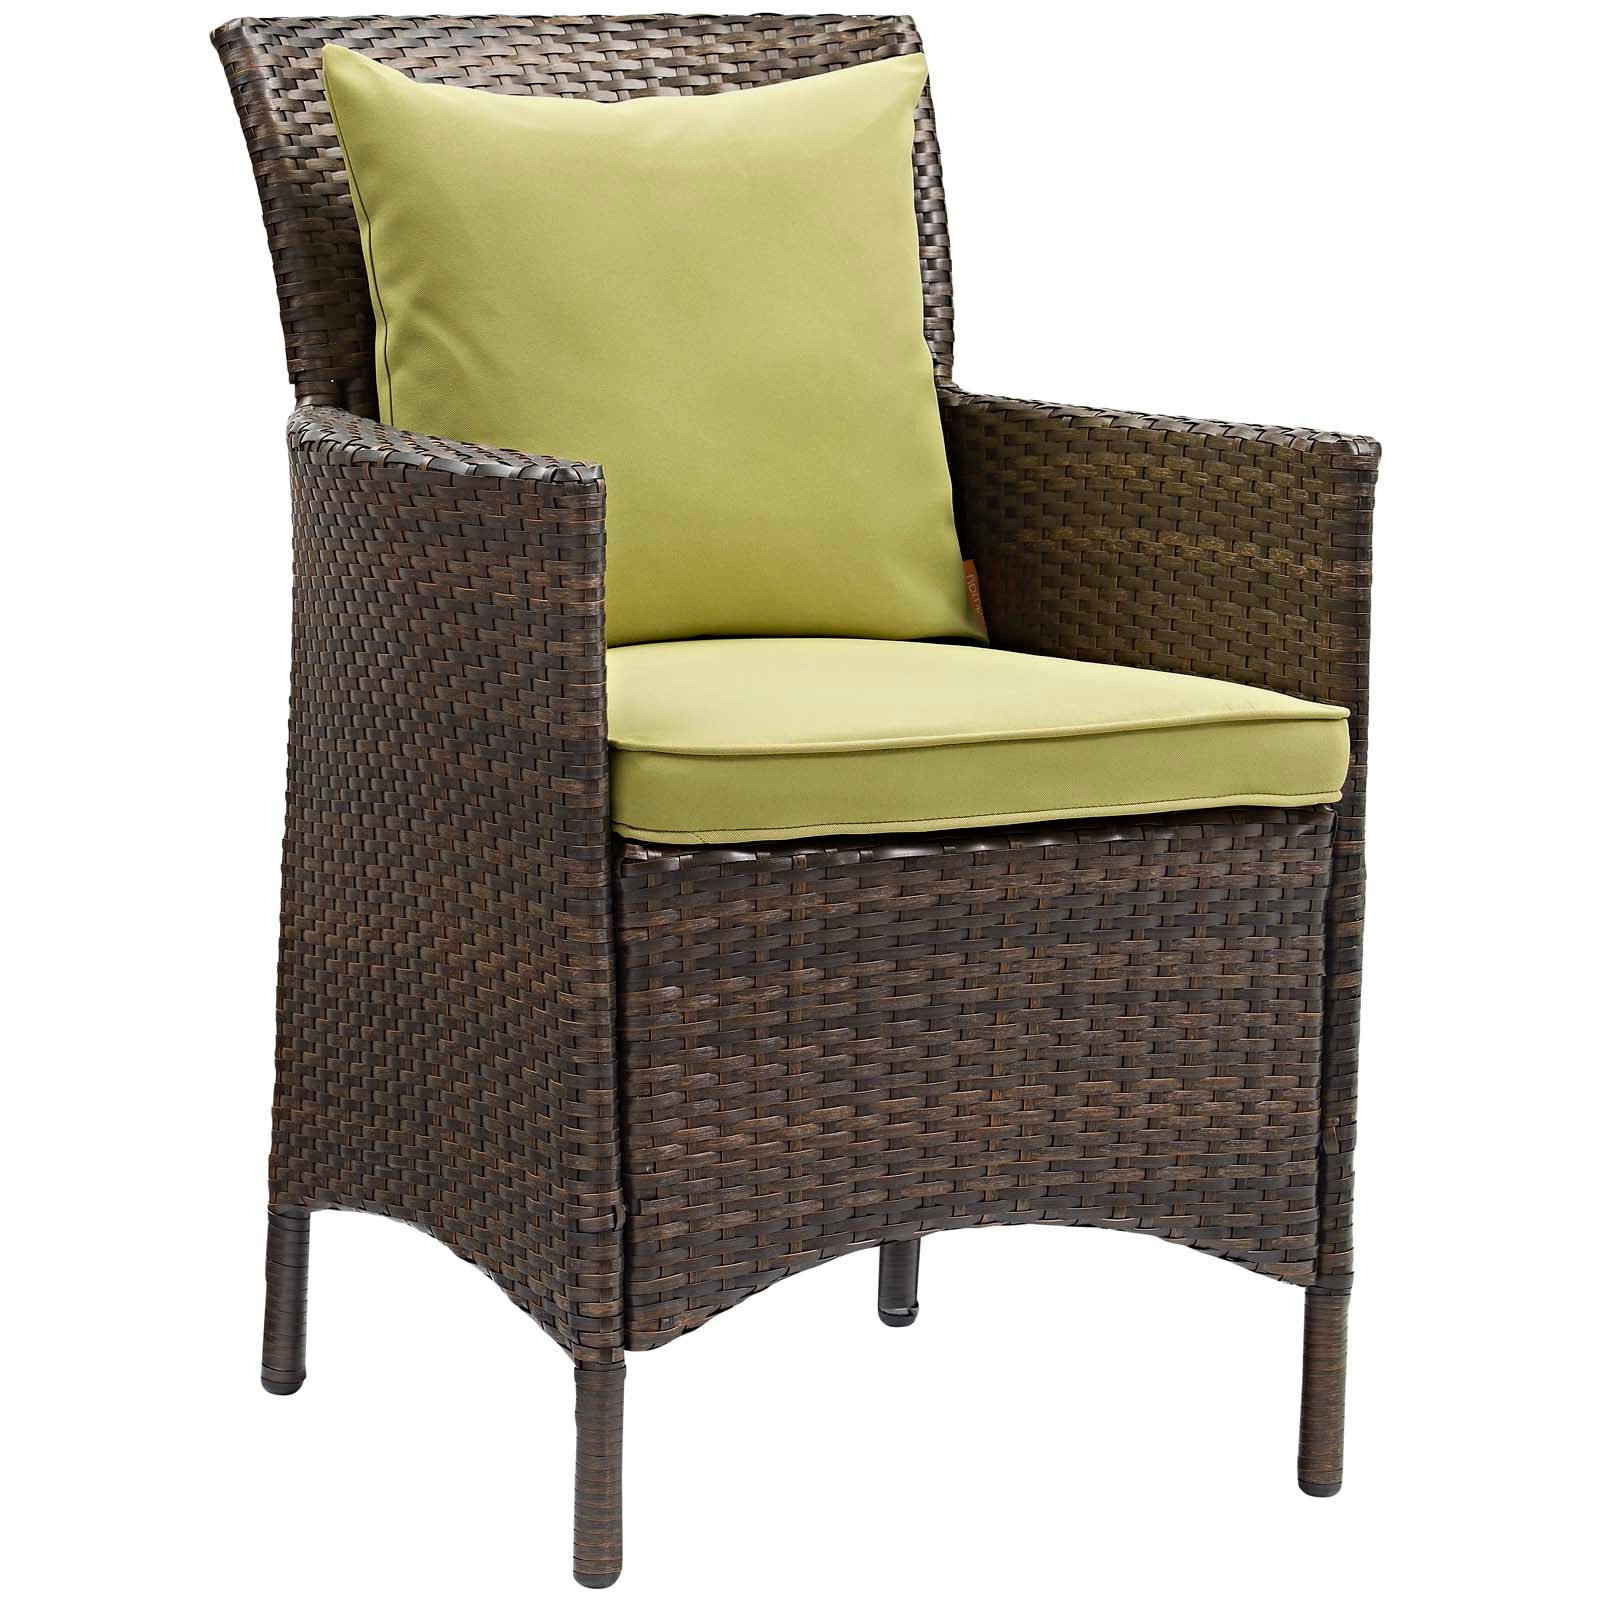 Modway Outdoor Dining Chairs - Conduit Outdoor Patio Wicker Rattan Dining Armchair Set of 4 Brown Peridot